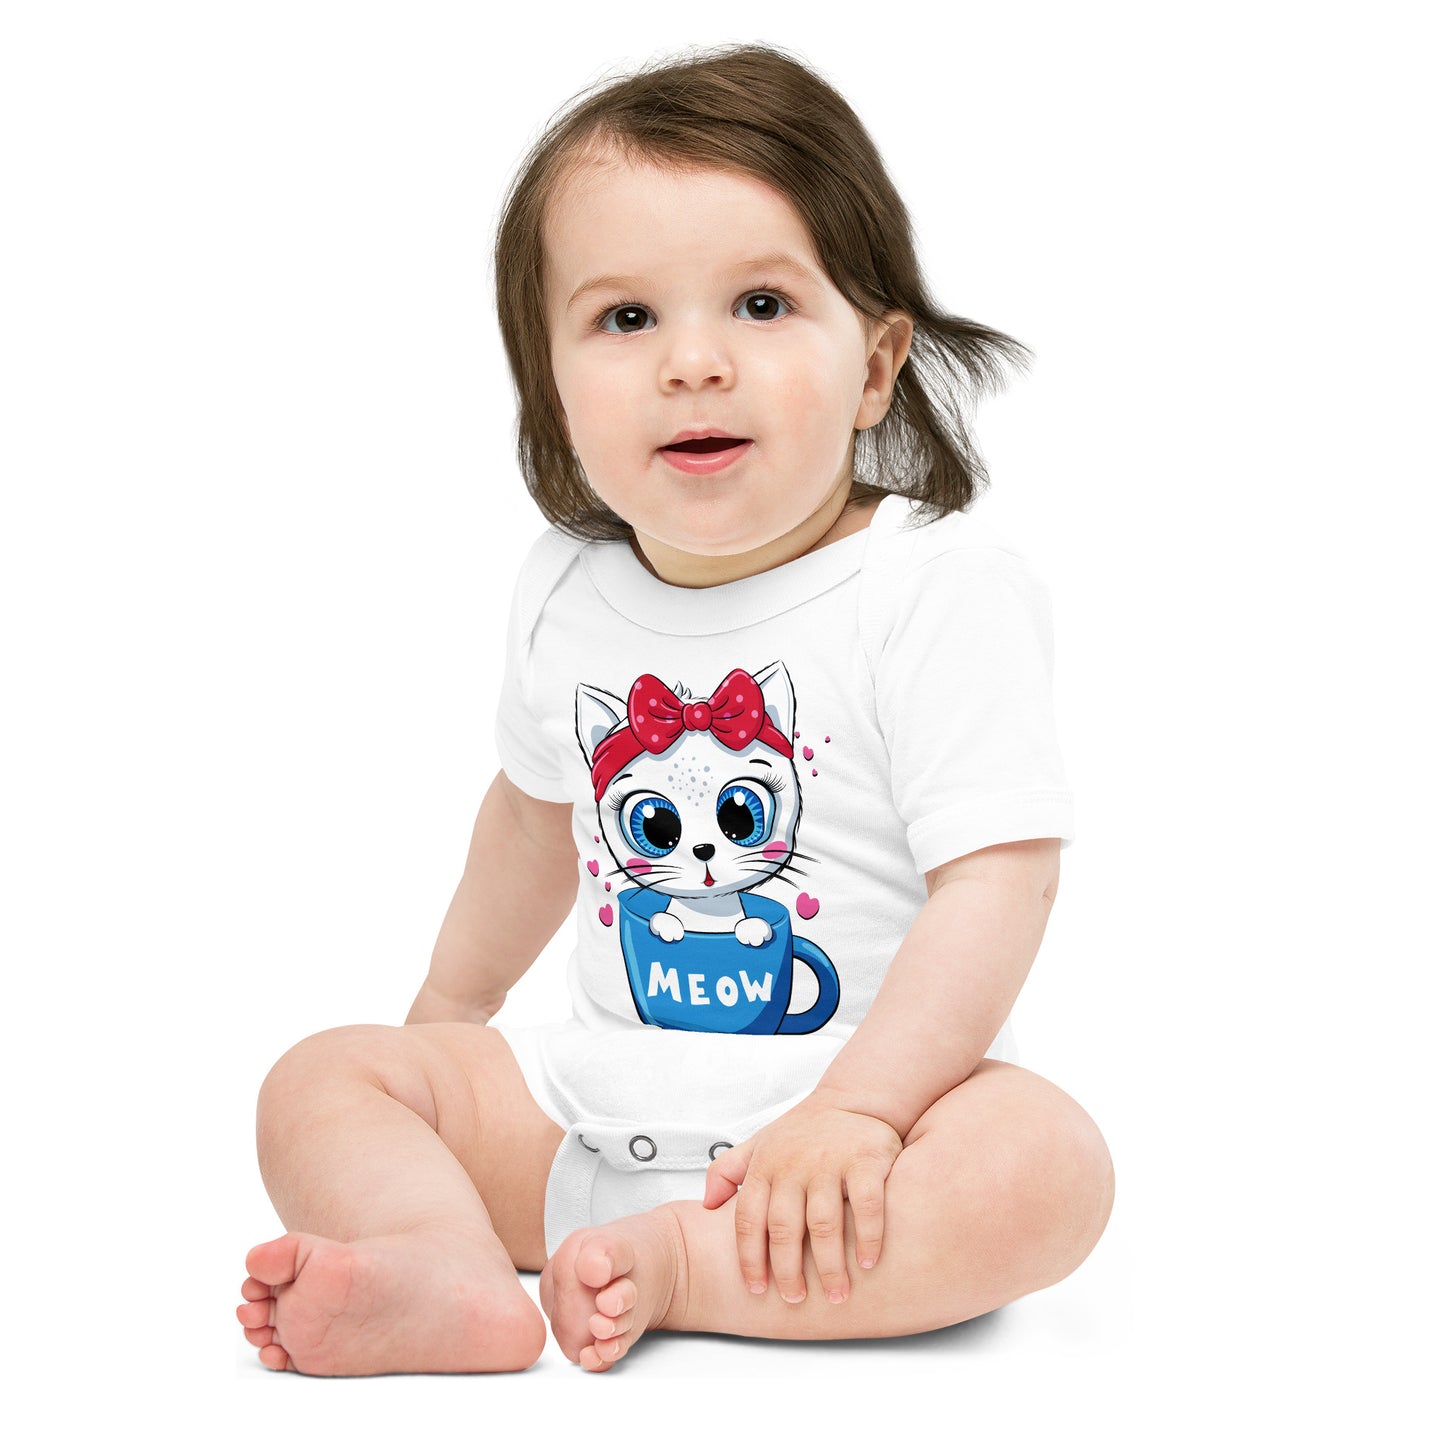 Cute Baby Cat Sitting in Cup Bodysuit, No. 0269